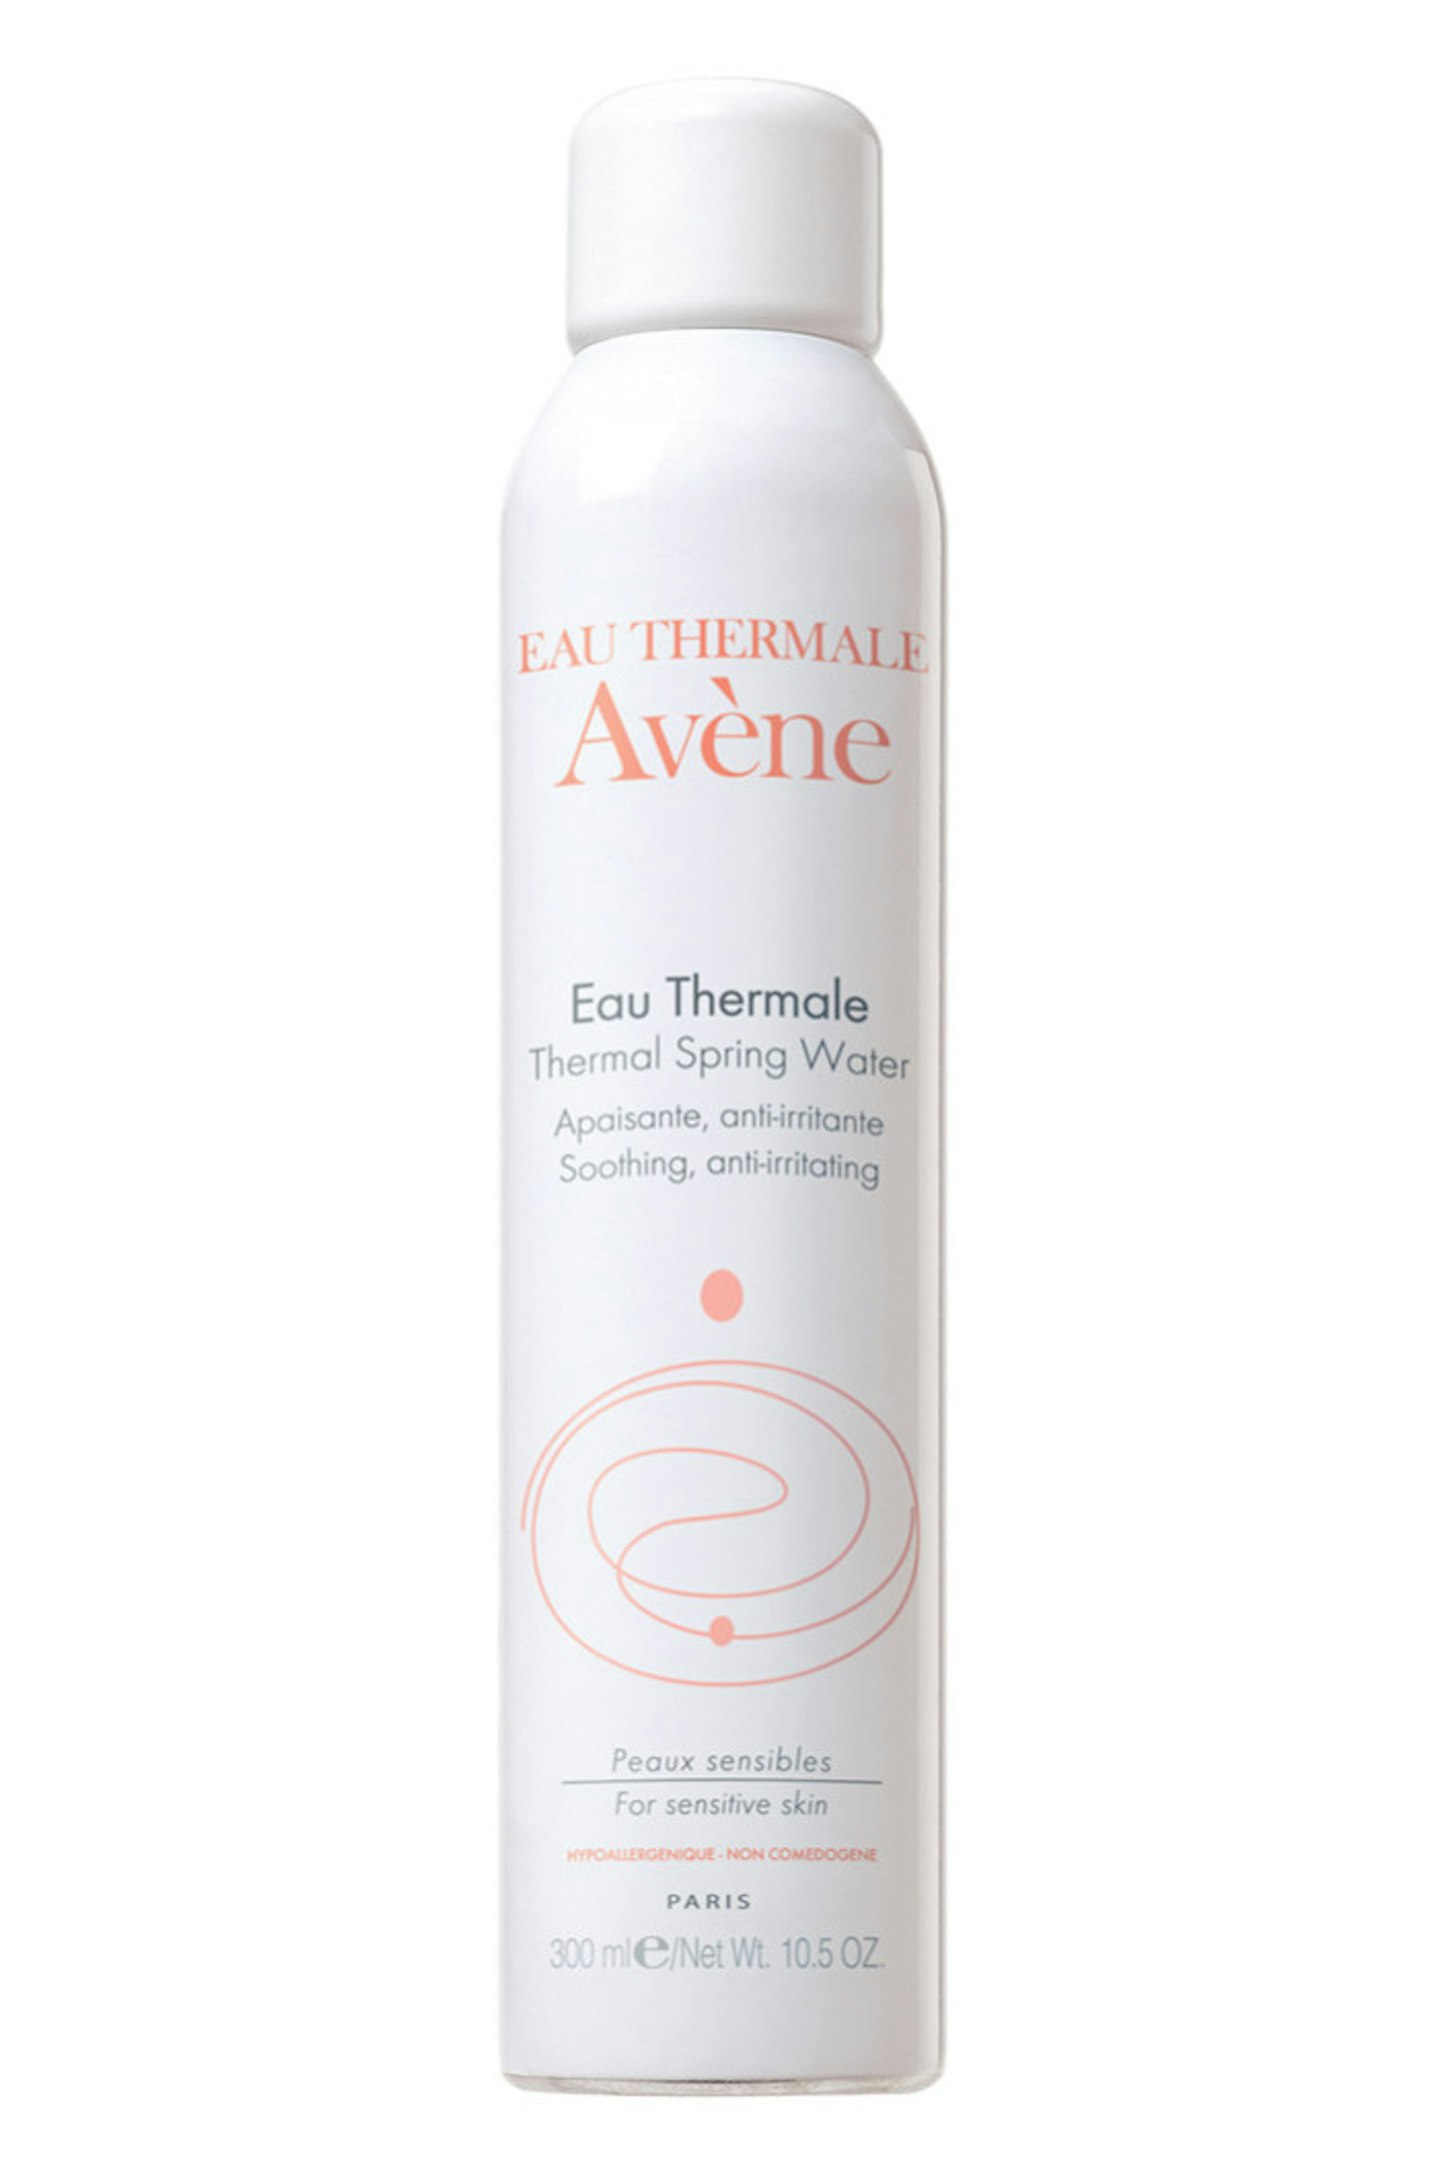 Eau Thermale Avene Thermal Spring Water, £7.00 for 150ml, Boots